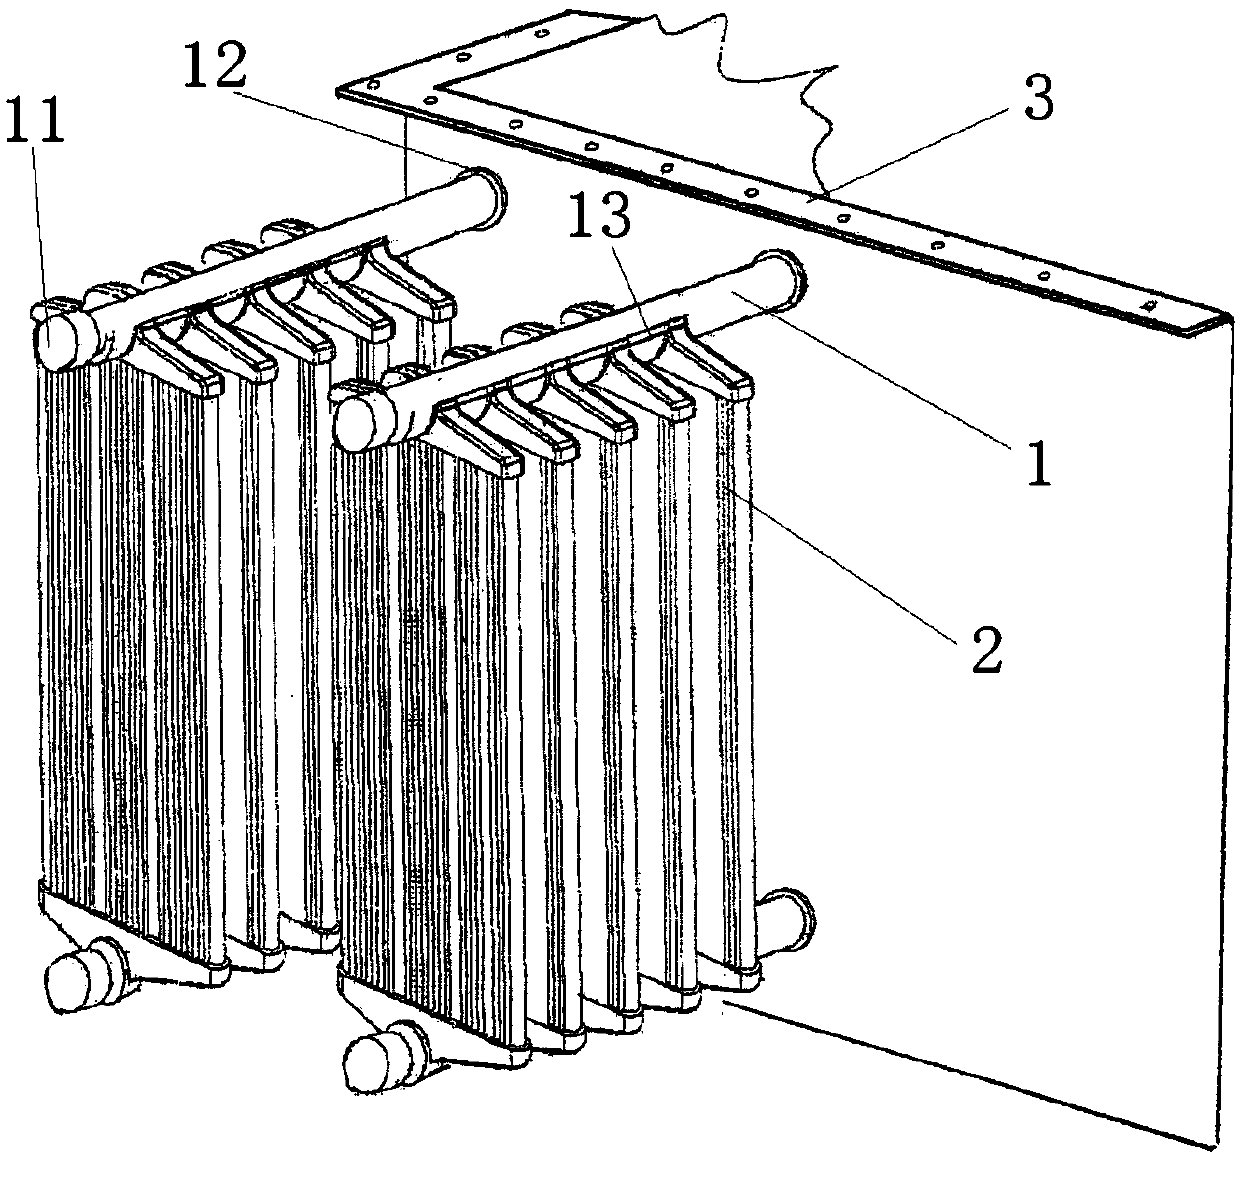 Clamping mechanism and process flow of heat sink of aluminum alloy transformer